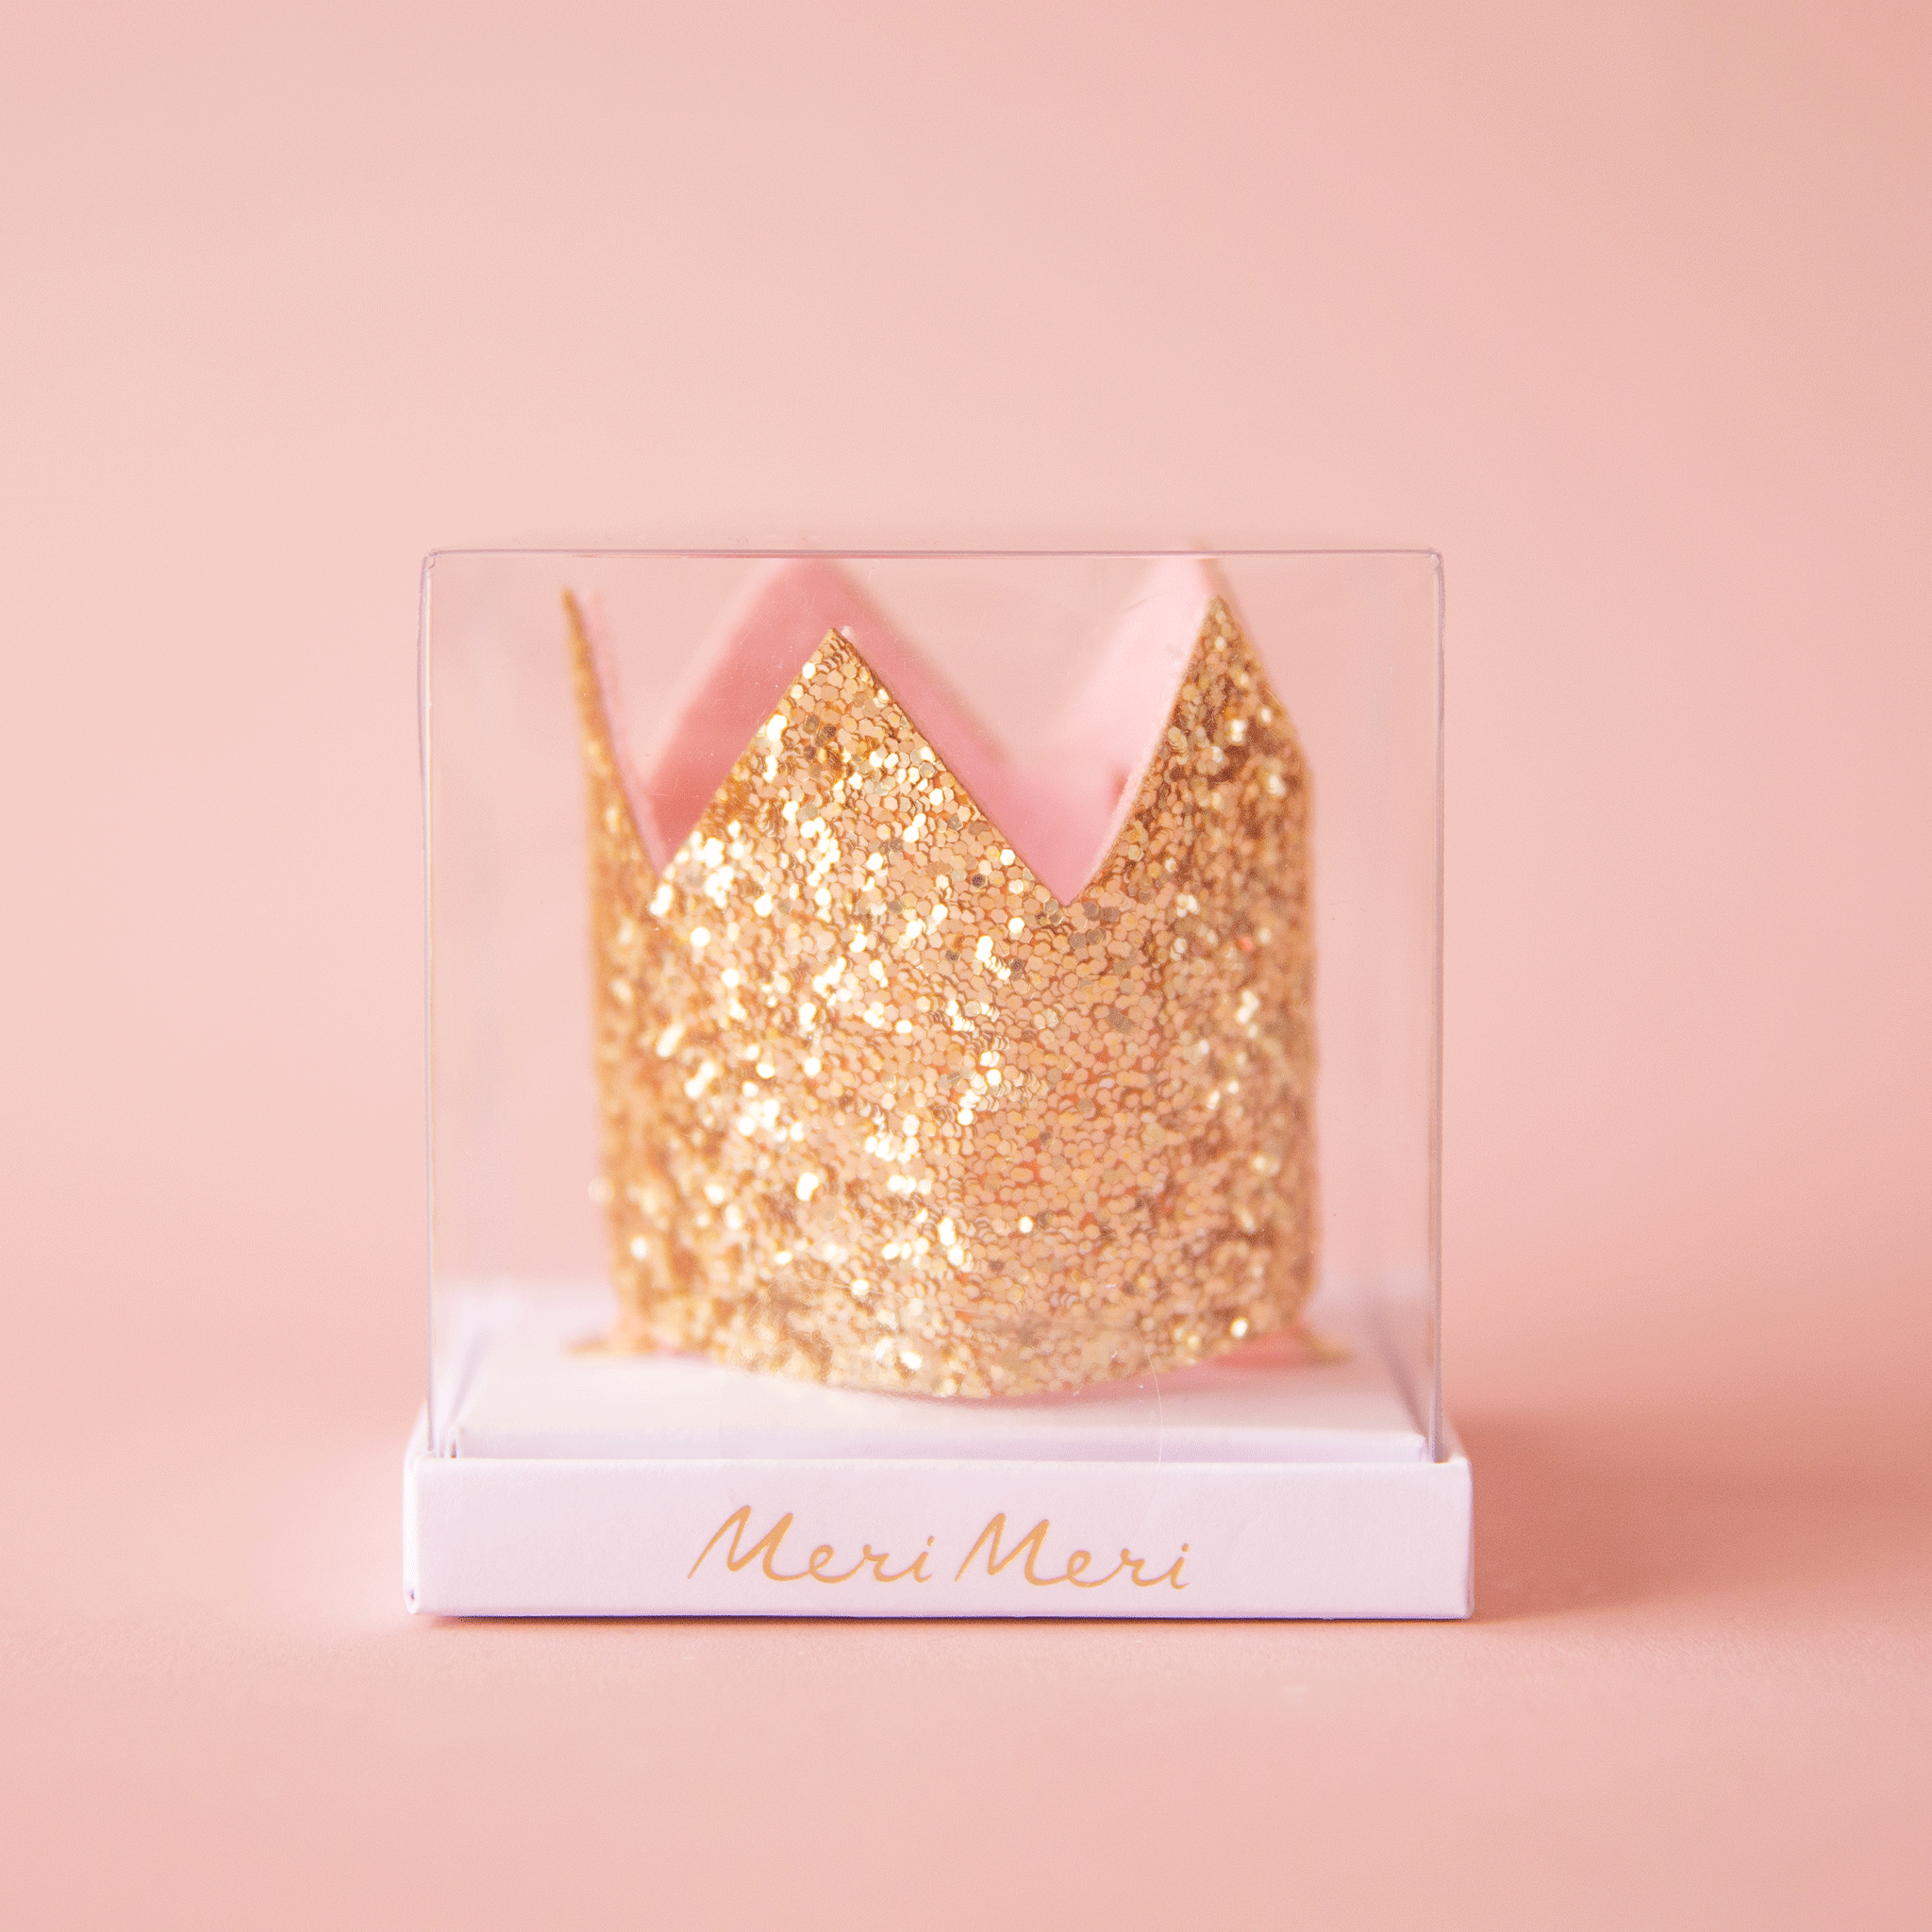 On a pink background is a gold crown shaped hair clip.